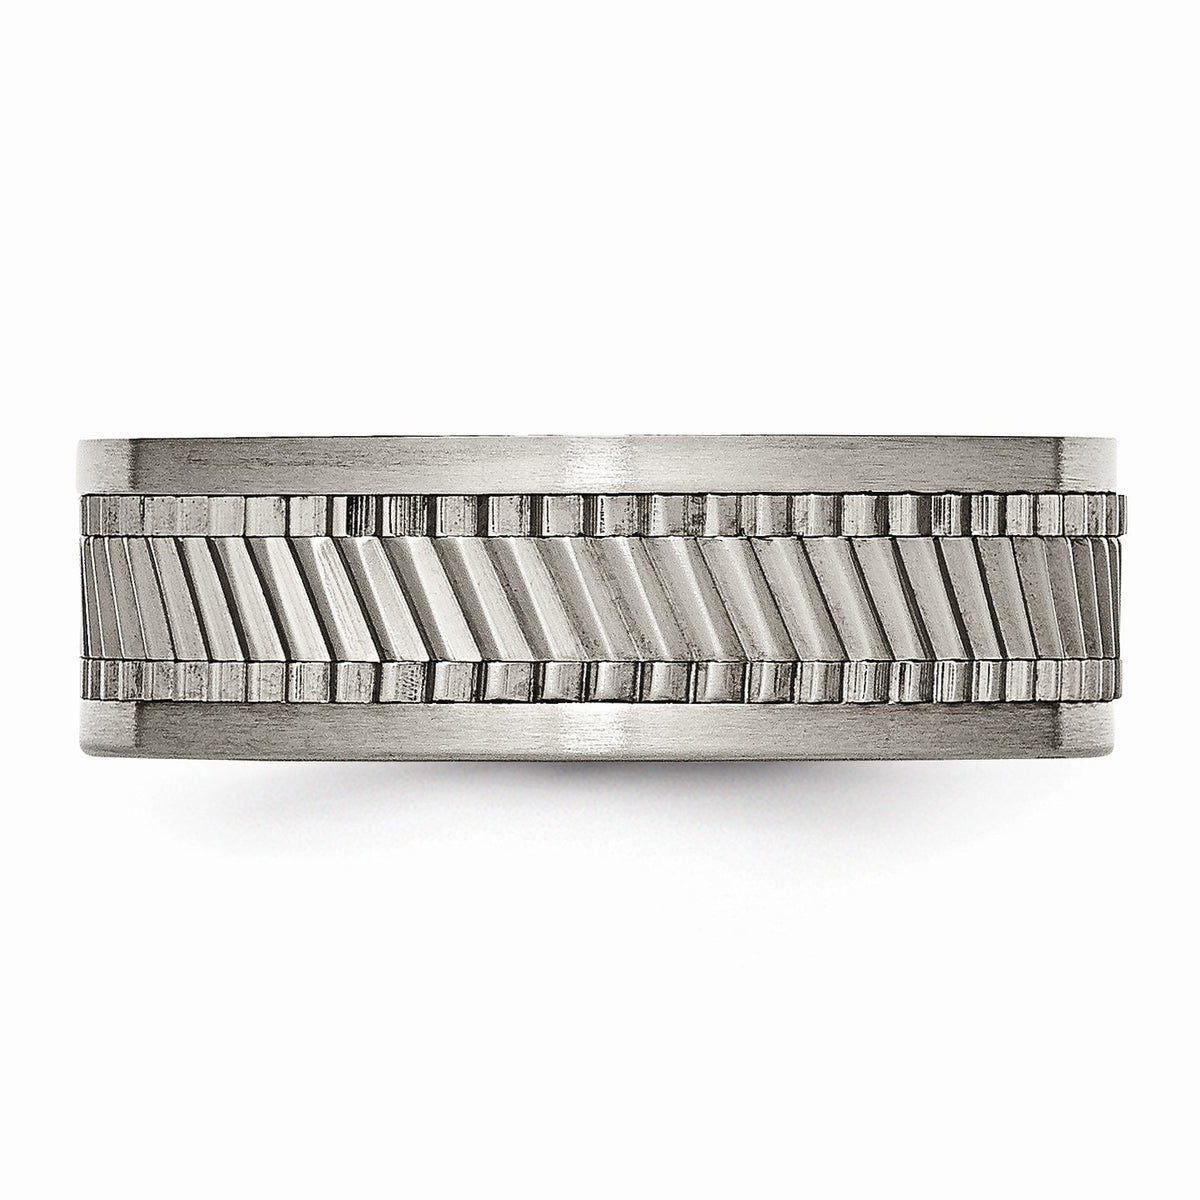 Alternate view of the 8mm Titanium Sawtooth Design Flat Band by The Black Bow Jewelry Co.